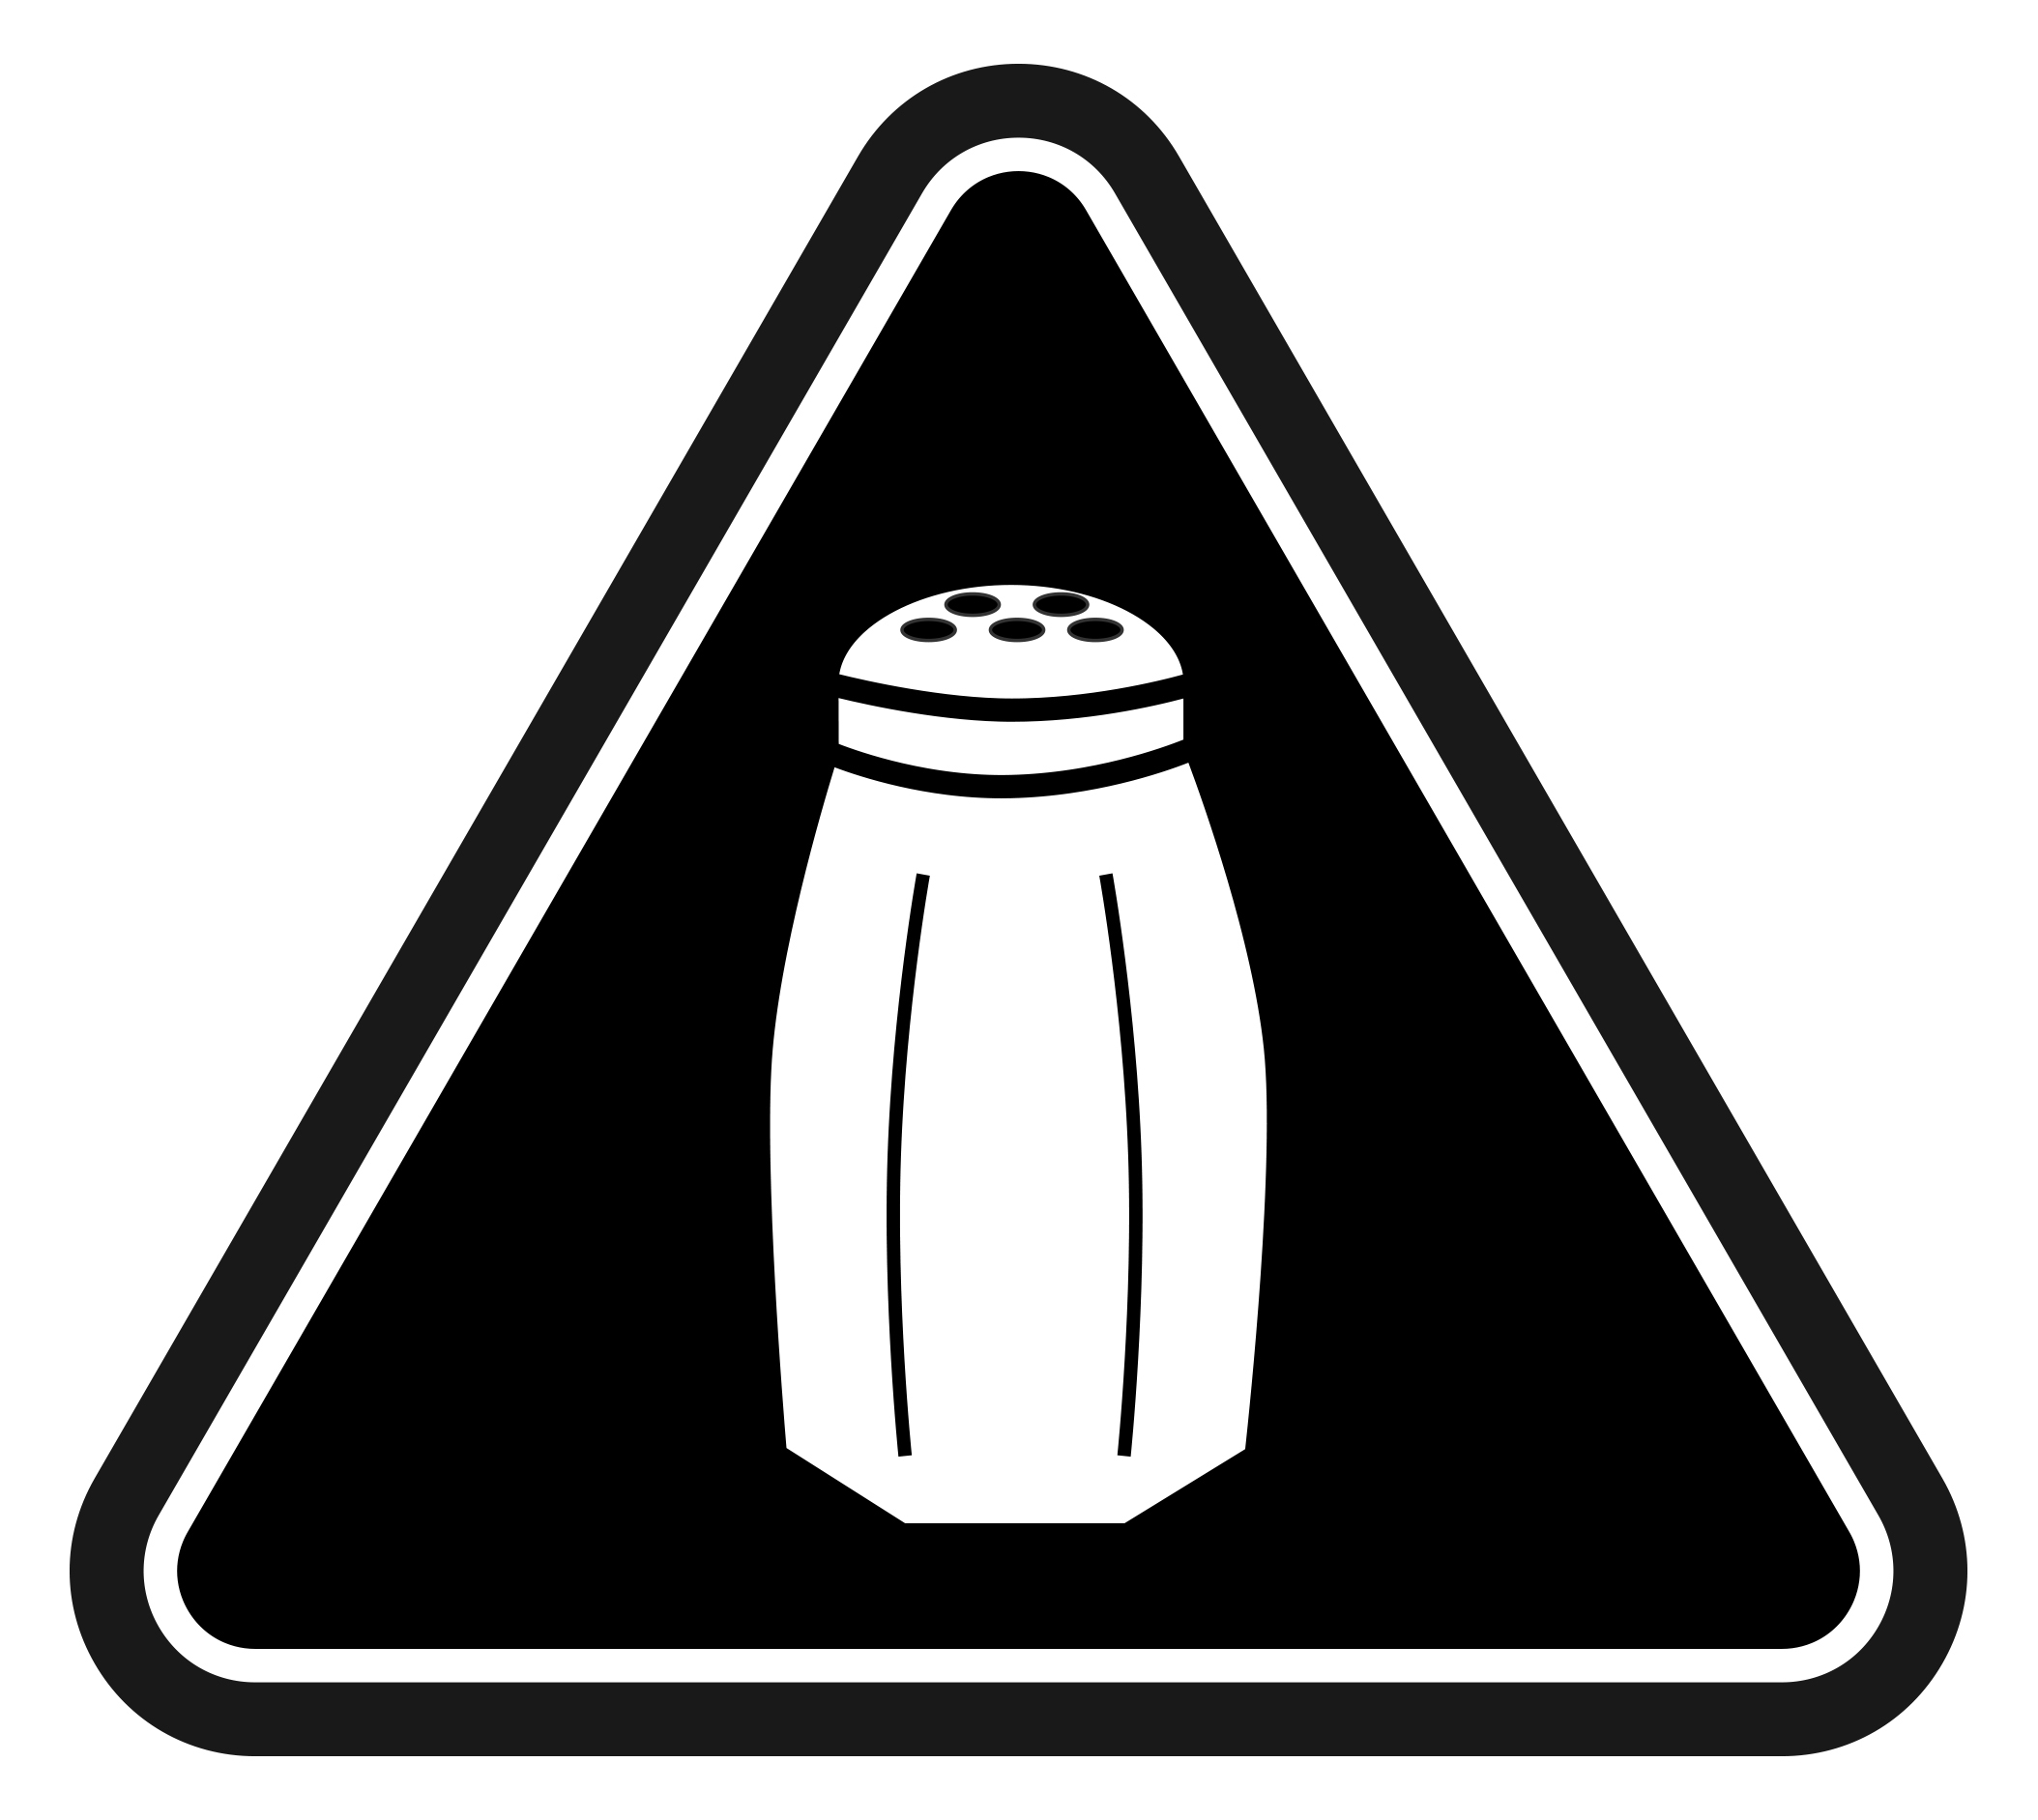 Sodium Warnings Will Stay On The Menu In NYC After Court Ruling